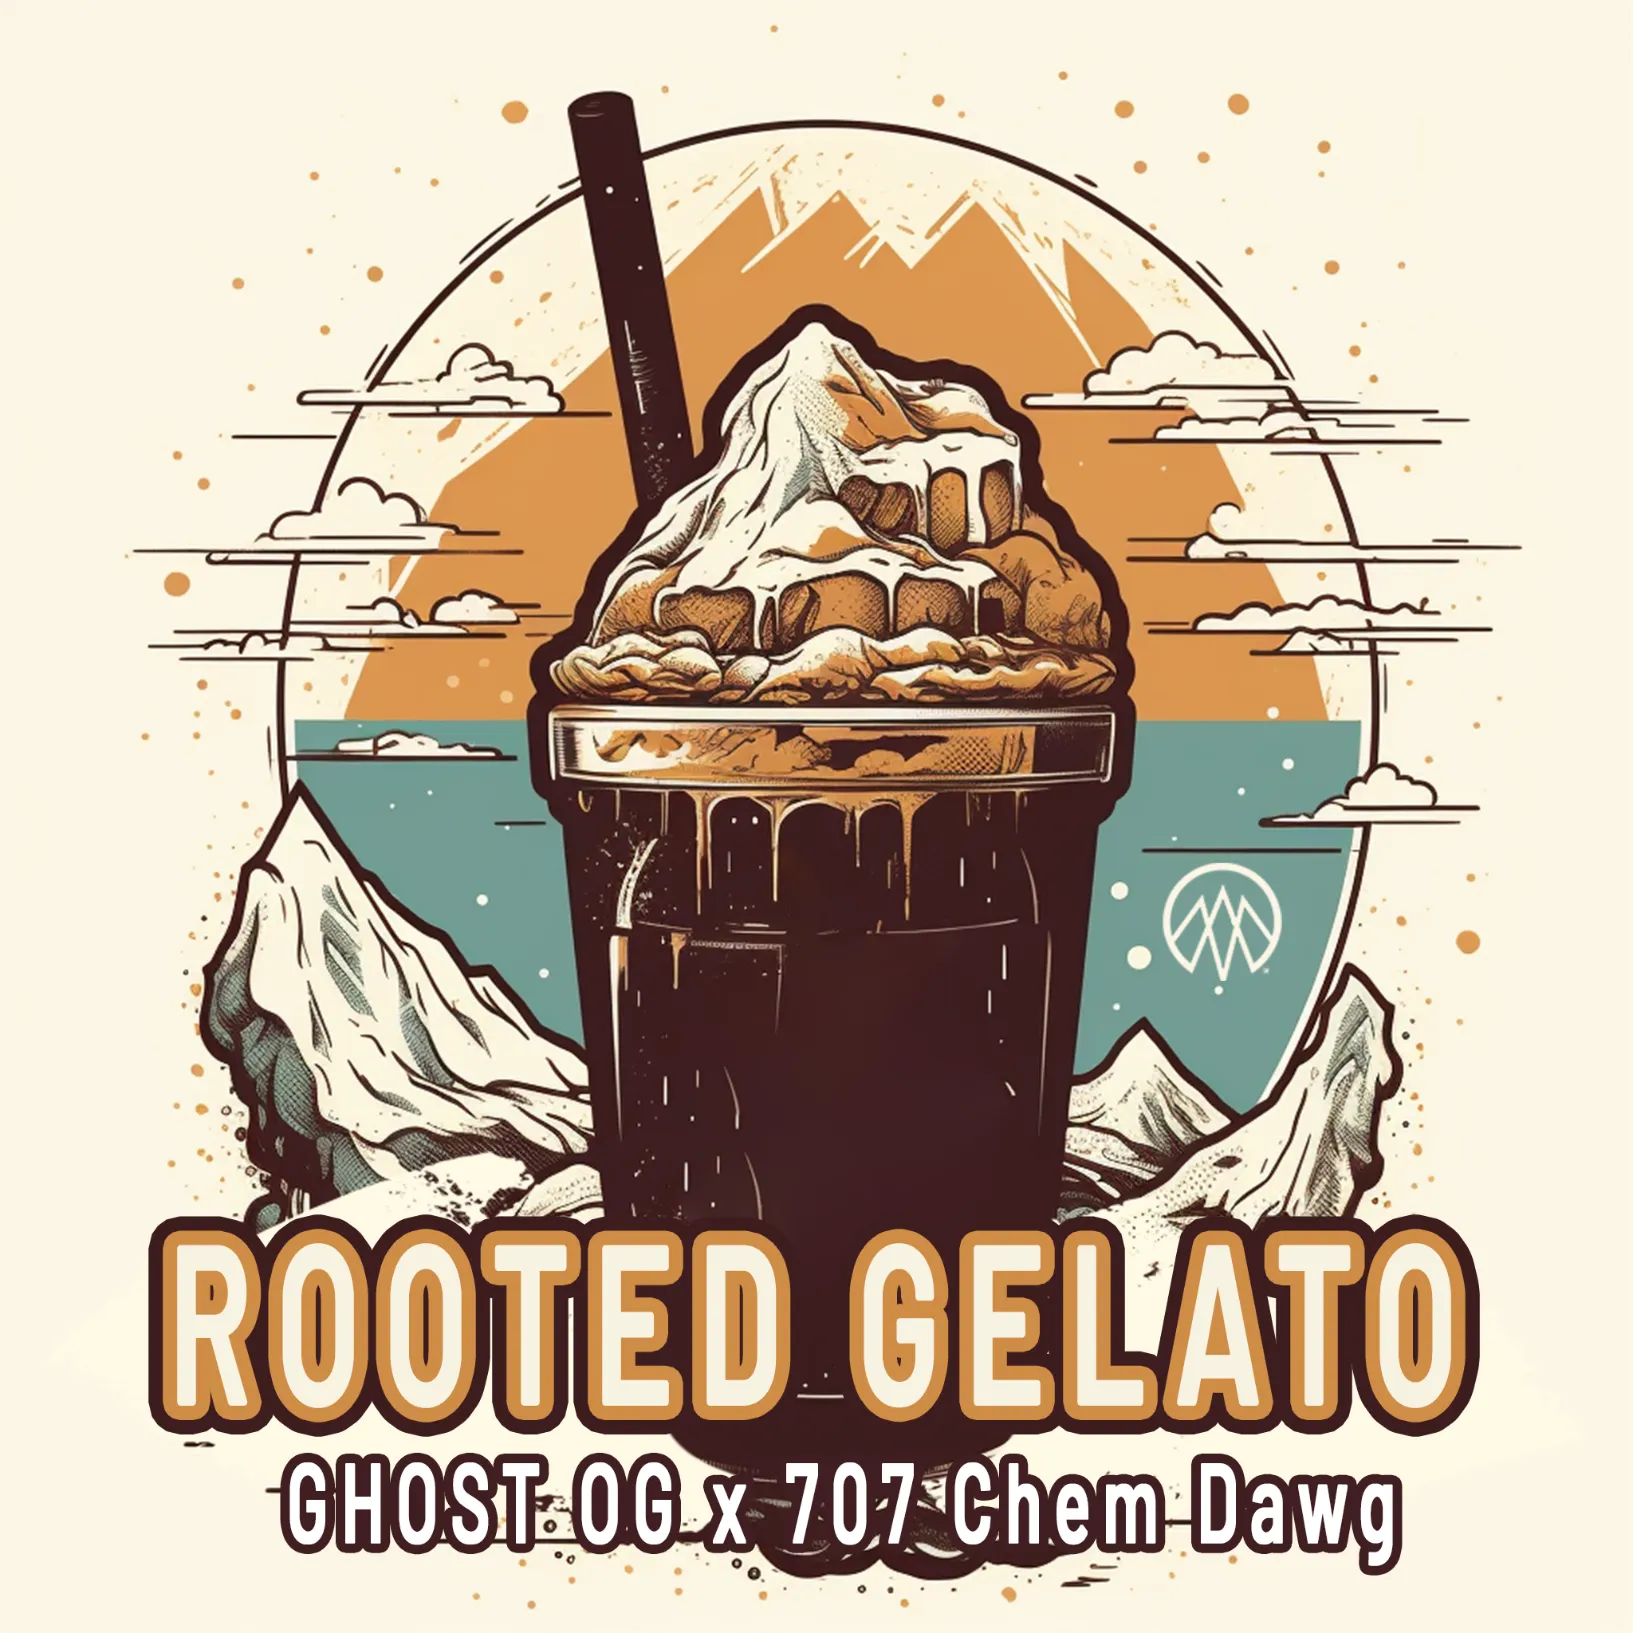 Rooted-Gelato